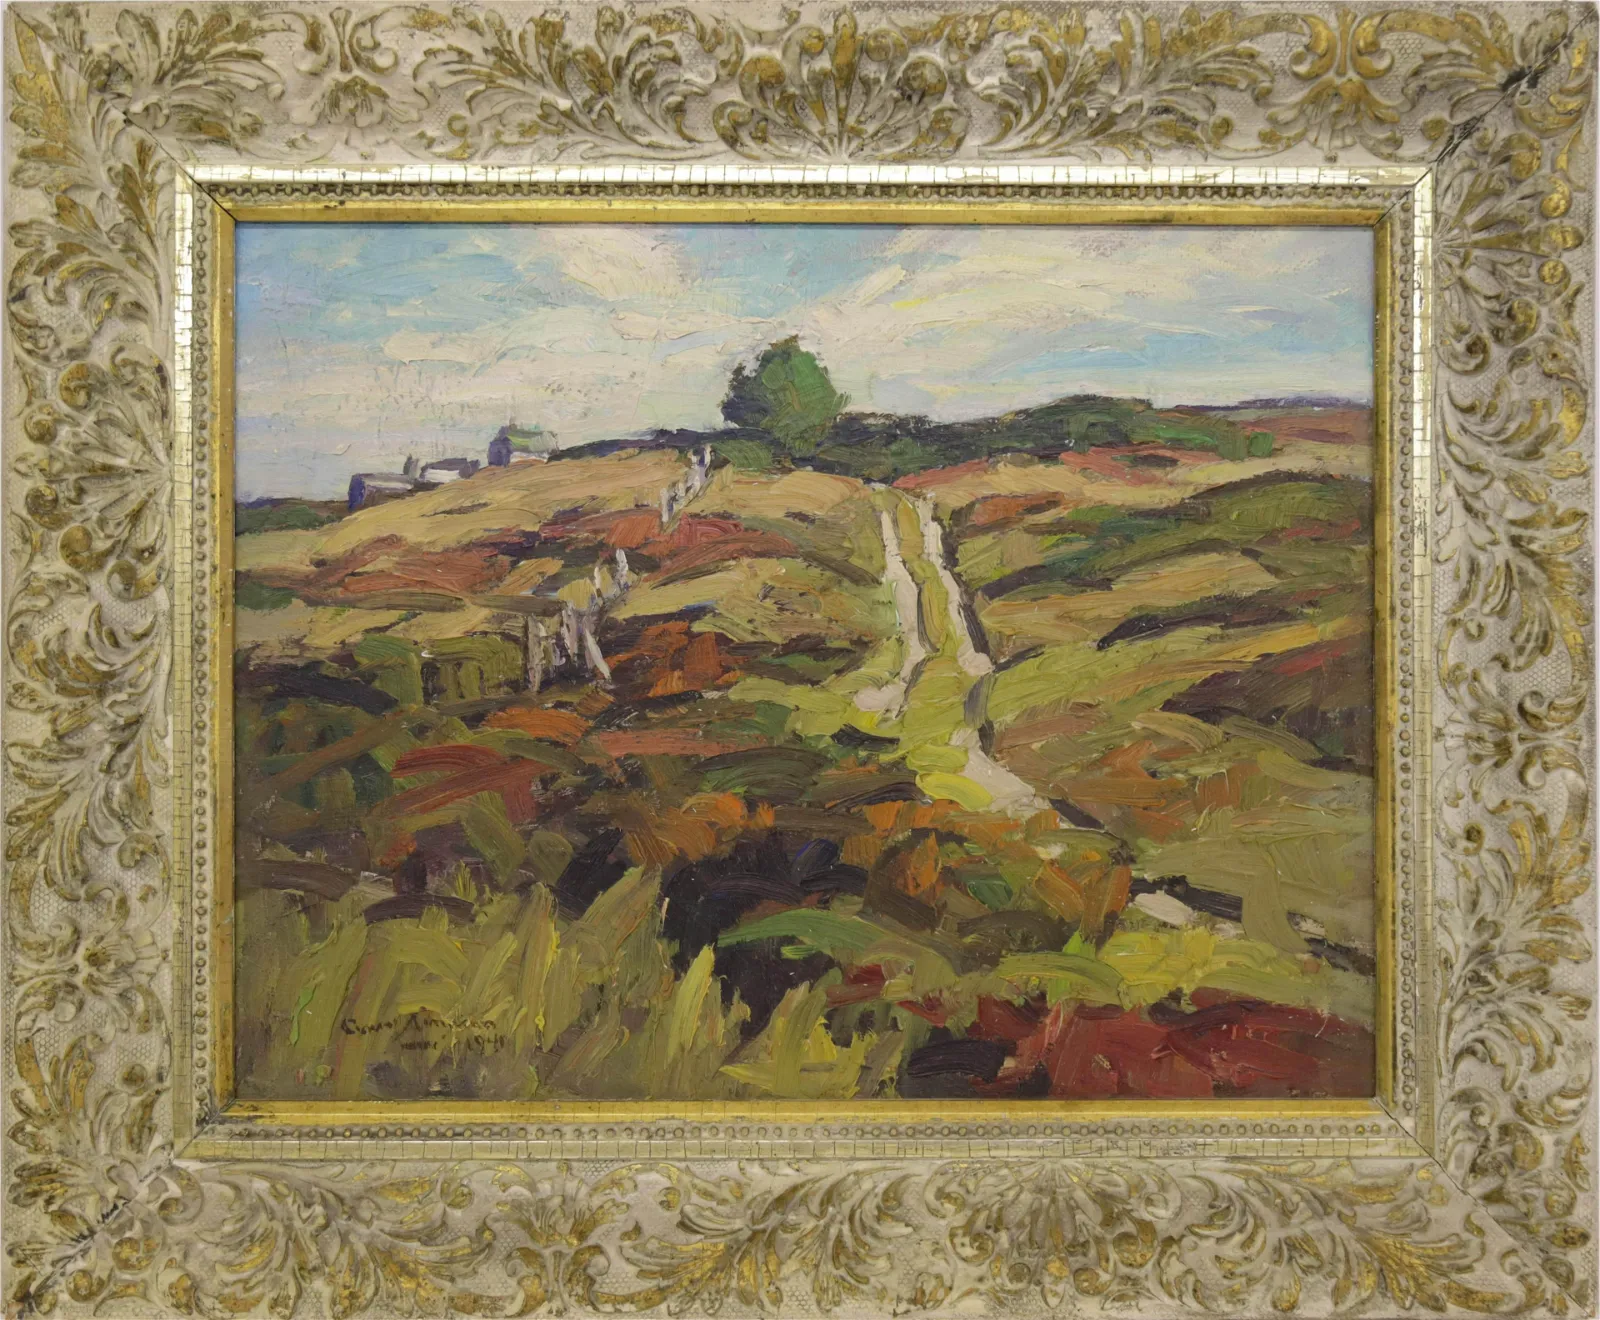 Anne Ramsdell Congdon Oil on Masonite "Middle Moors, Nantucket," estimated at $25,000-$35,000, sold for $45,000.